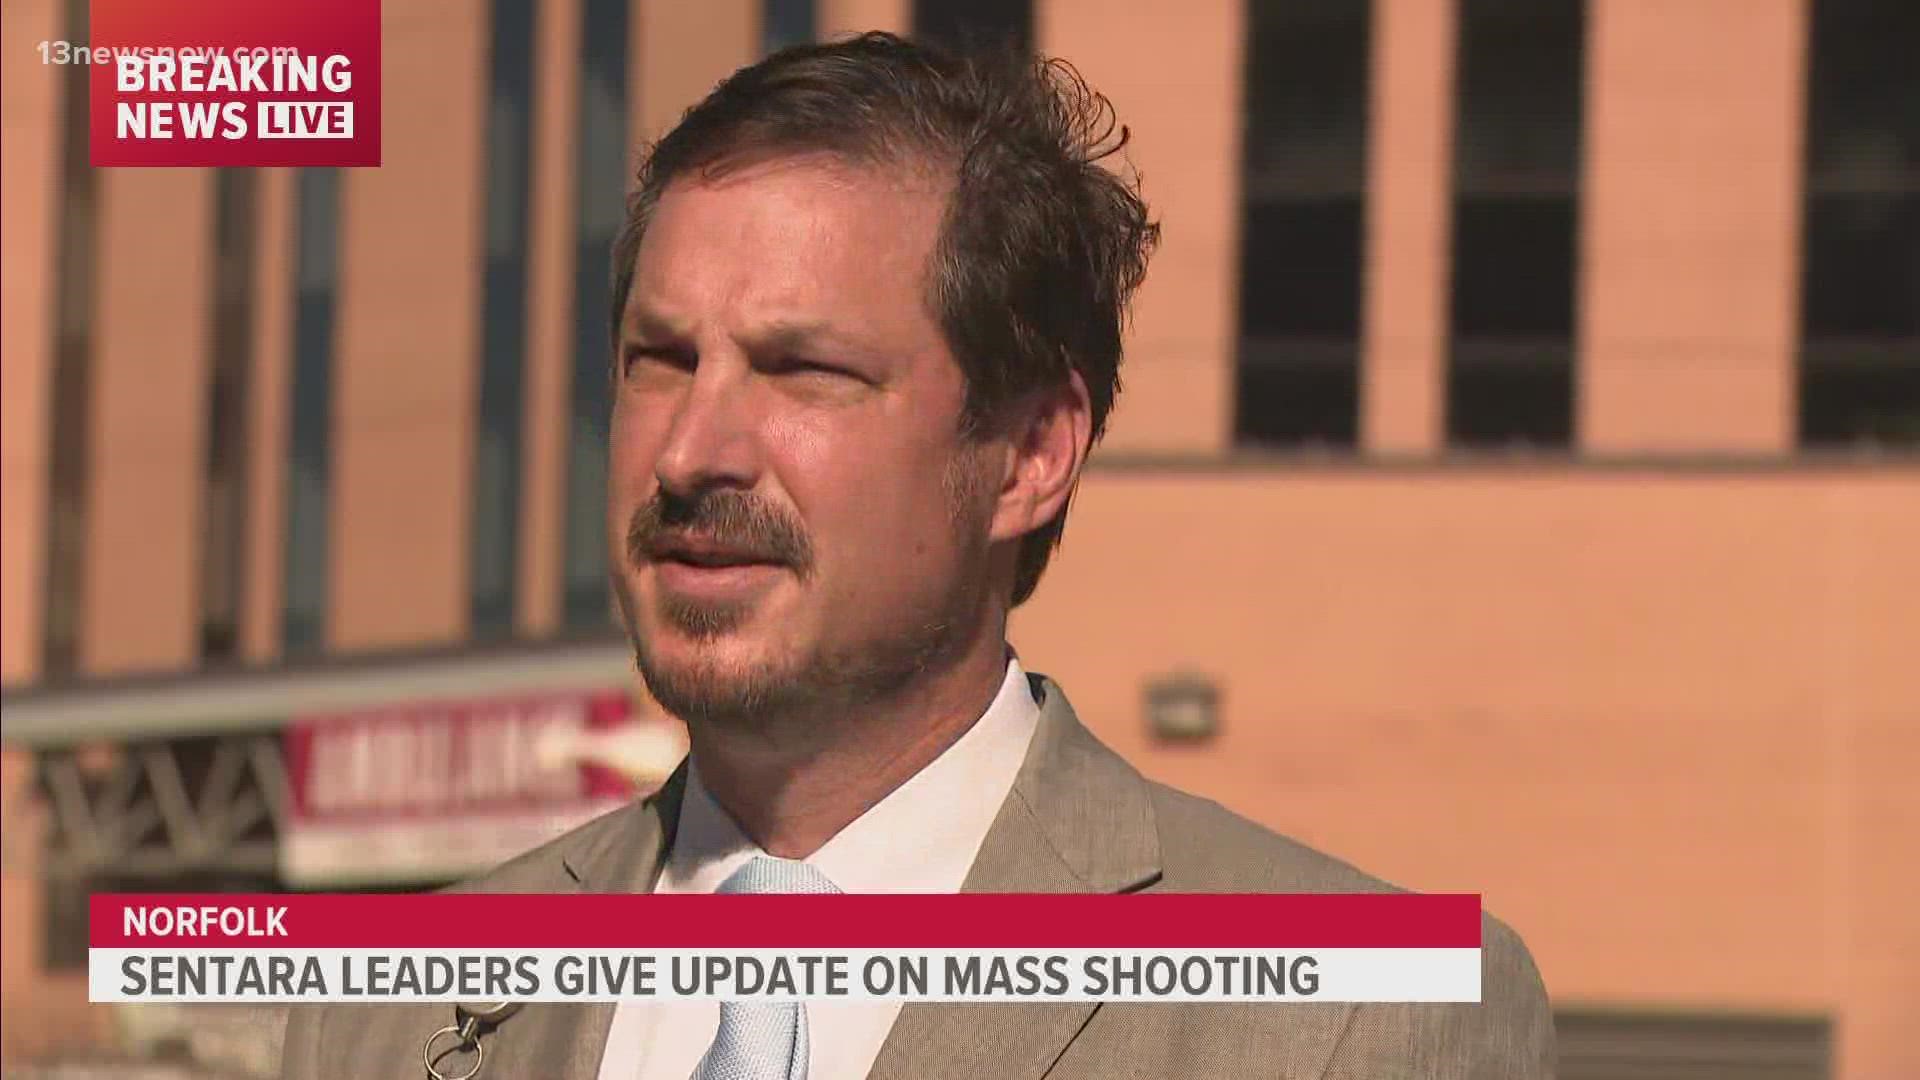 Sentara Norfolk General Hospital's Chief Medical Officer Dr. Michael Hooper and others talk about the response to the Walmart mass shooting in Chesapeake.